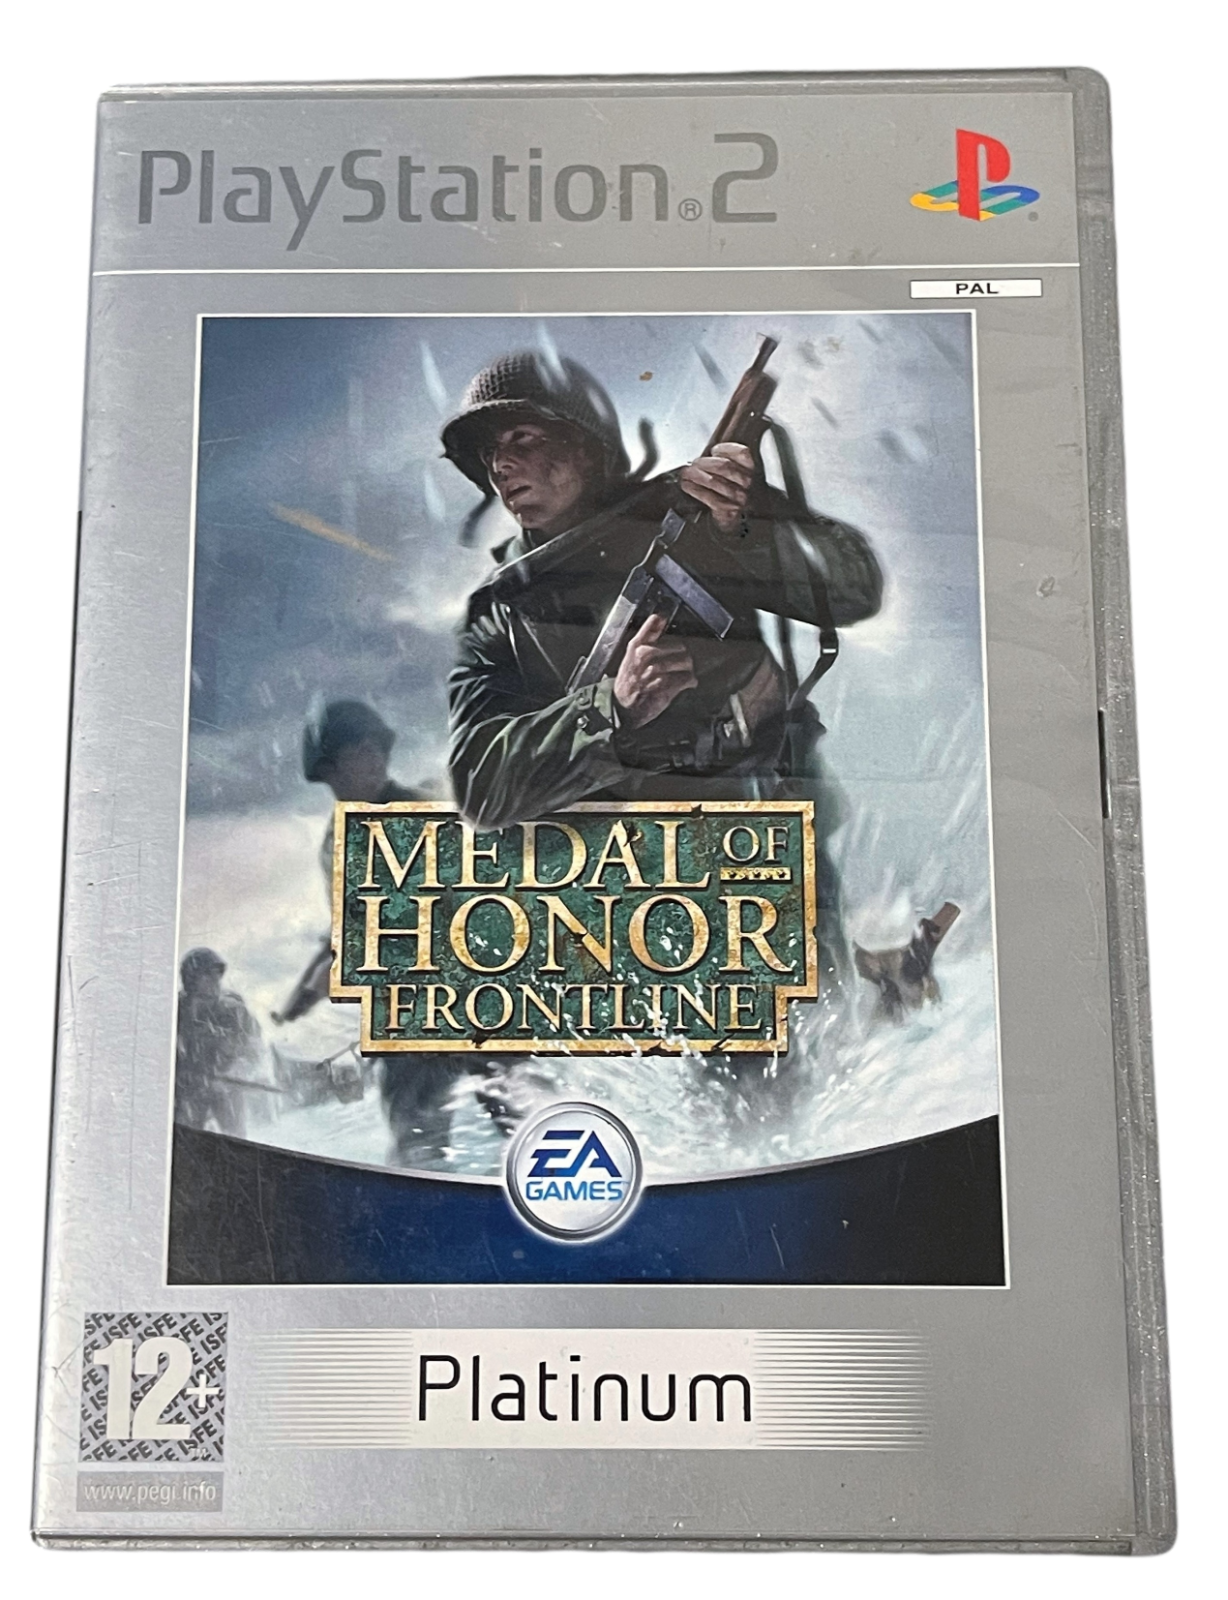 Game | Sony Playstation PS2 | Medal Of Honor Frontline [Platinum]